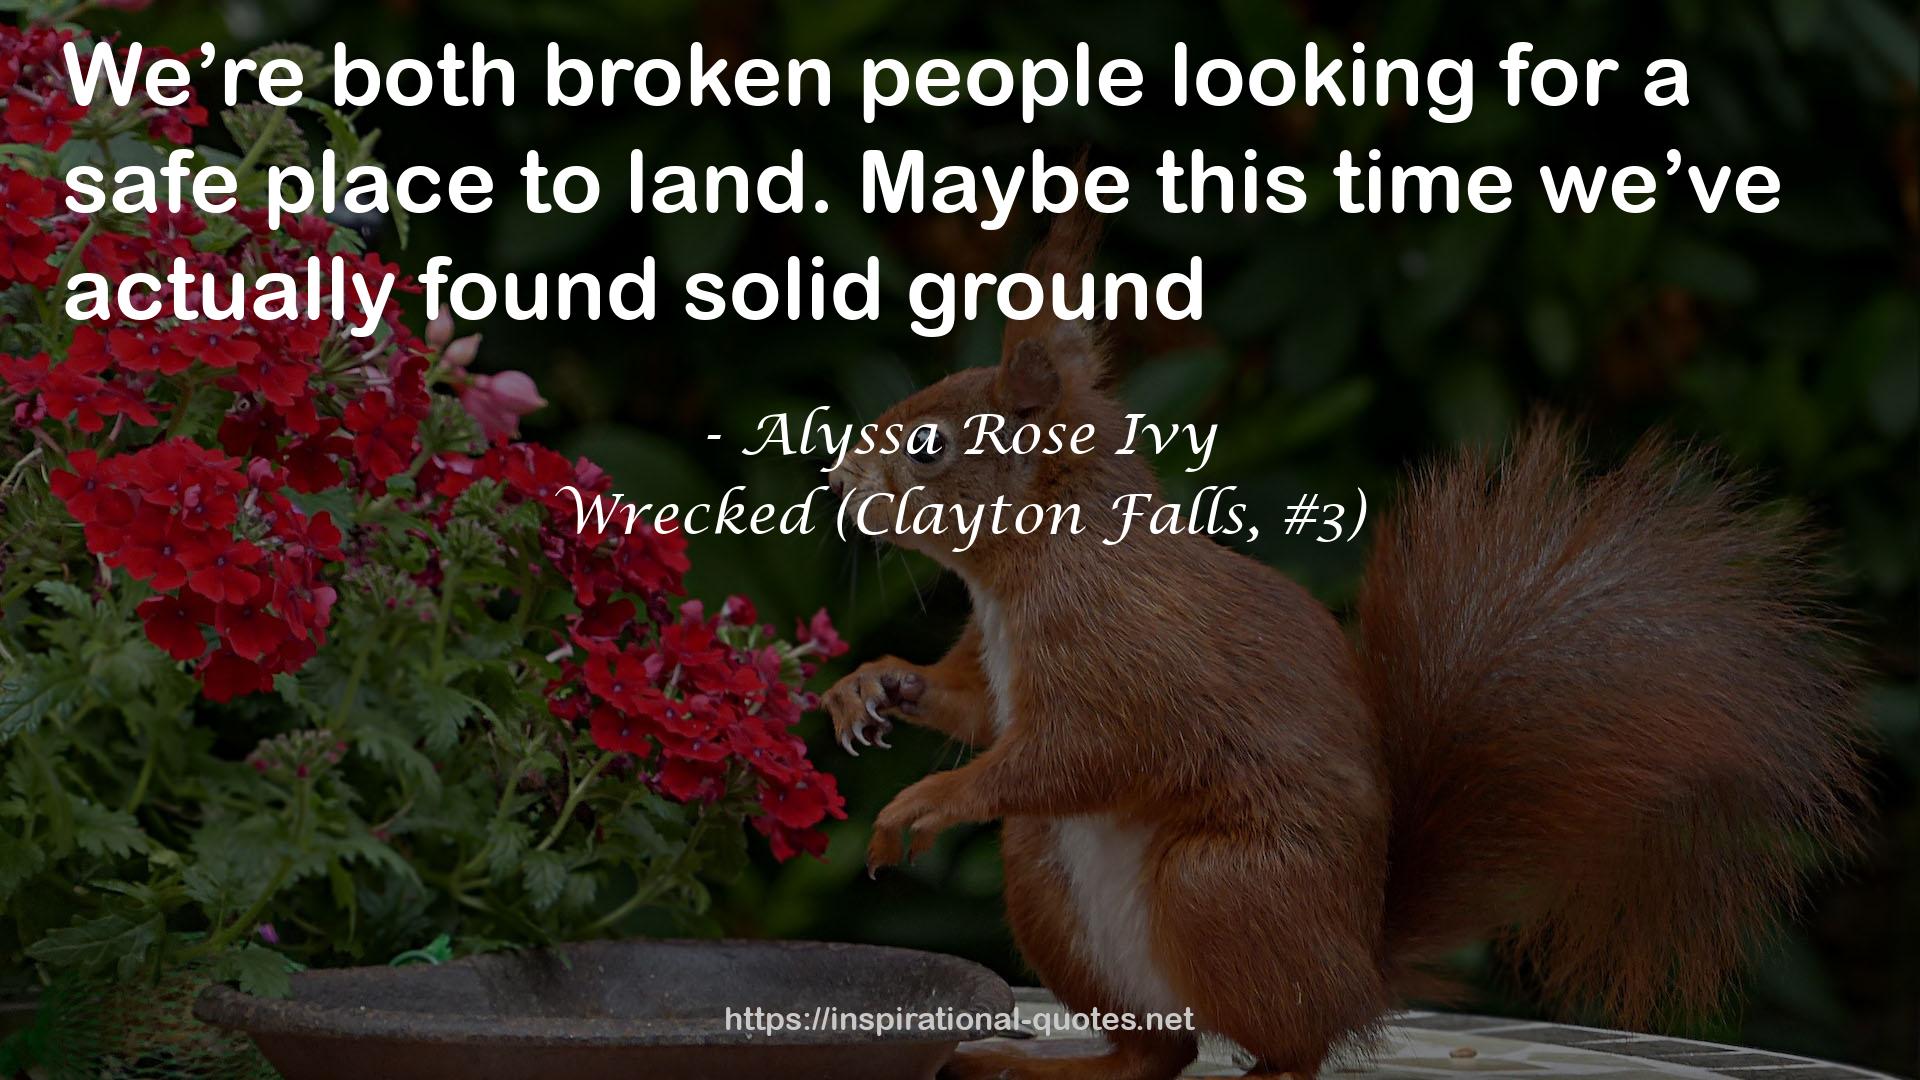 Wrecked (Clayton Falls, #3) QUOTES